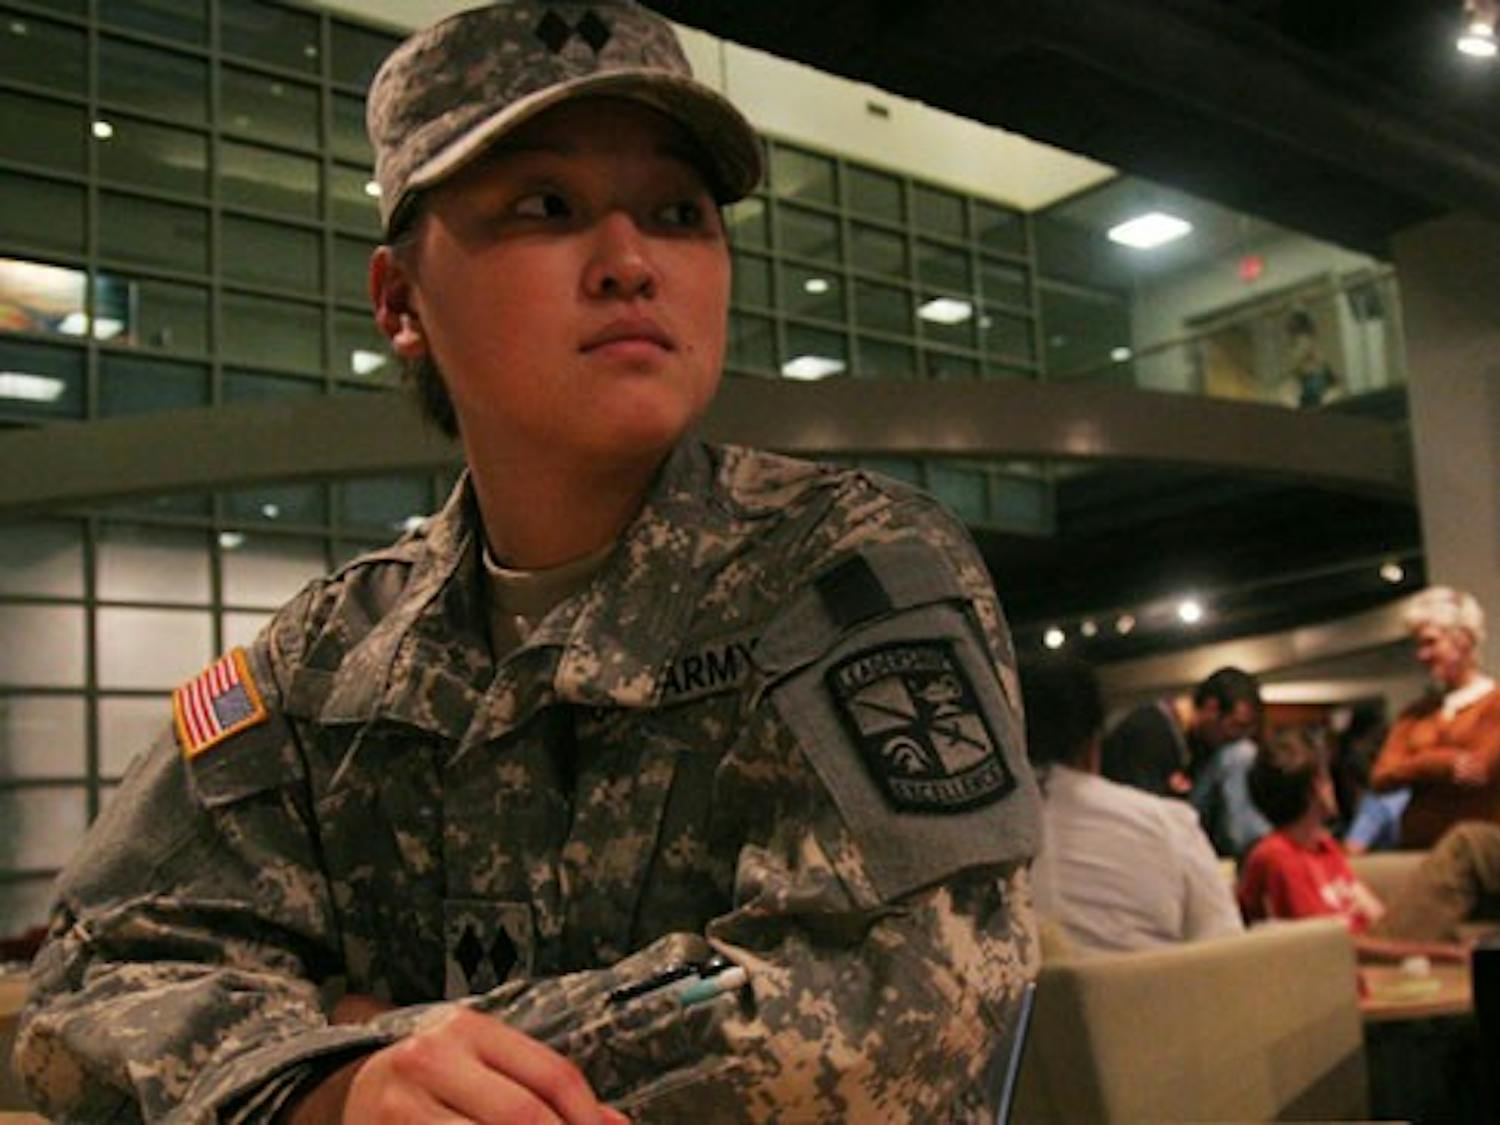 Kristi McNair, a journalism major from Okinawa, Japan, sits in her Army ROTC uniform in the Student Union. DTH/Lauren McCay